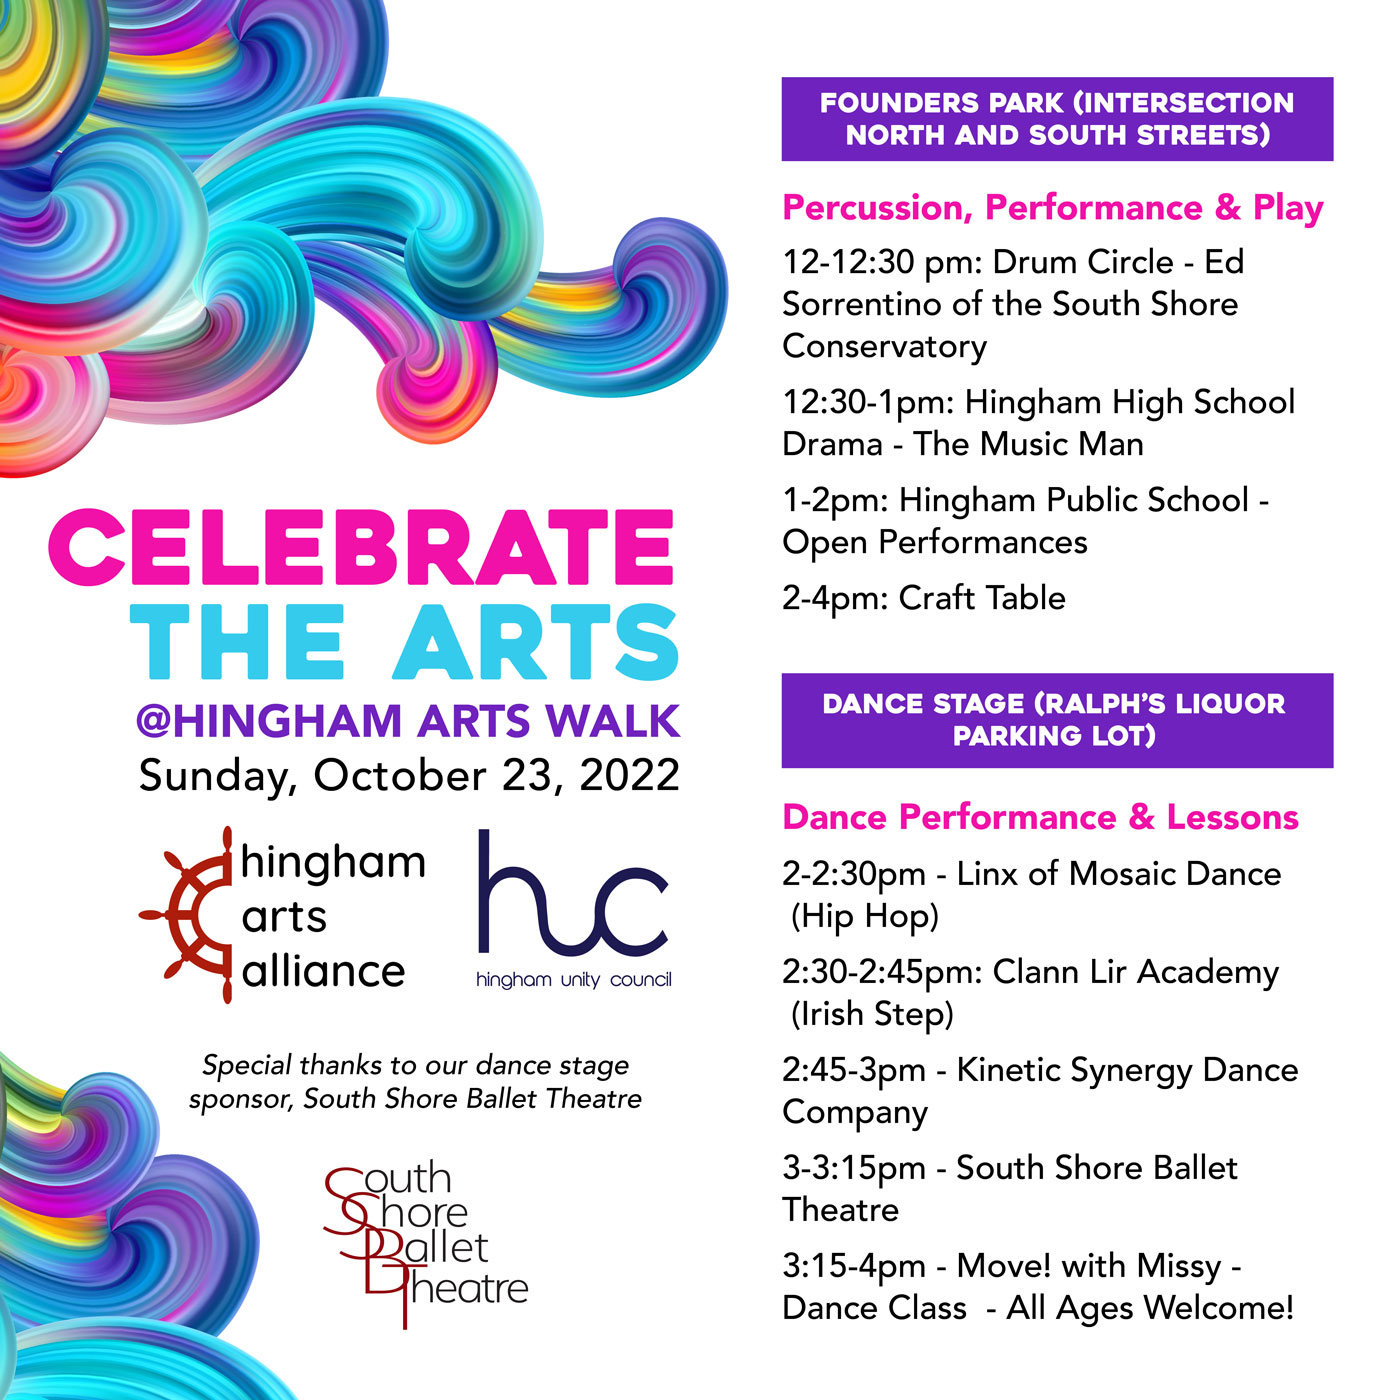 Colorful swirls on white with copy as follows: Celebrate the Arts @ Hingham Arts Walk Sunday, October 23, 2022 (logos of Hingham Arts Alliance and Hingham Unity Council) Special thanks to our dance stage sponsor, South Shore Ballet Theatre (logo of South Shore Ballet Theatre) Percussion, Performance & Play at Founder's Park (where North and South Streets intersect): 12-12:30 pm: Drum Circle - Ed Sorrentino of the South Shore Conservatory 12:30-1pm: Hingham High School Drama - The Music Man 1-2pm: Hingham Public School - Open Performances 2-4pm: Craft Table Dance Performance & Lessons at Ralph's Liquor Parking Lot 2-2:30pm - Linx of Mosaic Dance (Hip Hop) 2:30-2:45pm: Clann Lir Academy (Irish Step) 2:45-3pm - Kinetic Synergy Dance Company 3-3:15pm - South Shore Ballet Theatre 3:15-4pm - Move! with Missy - Dance Class - All Ages Welcome!